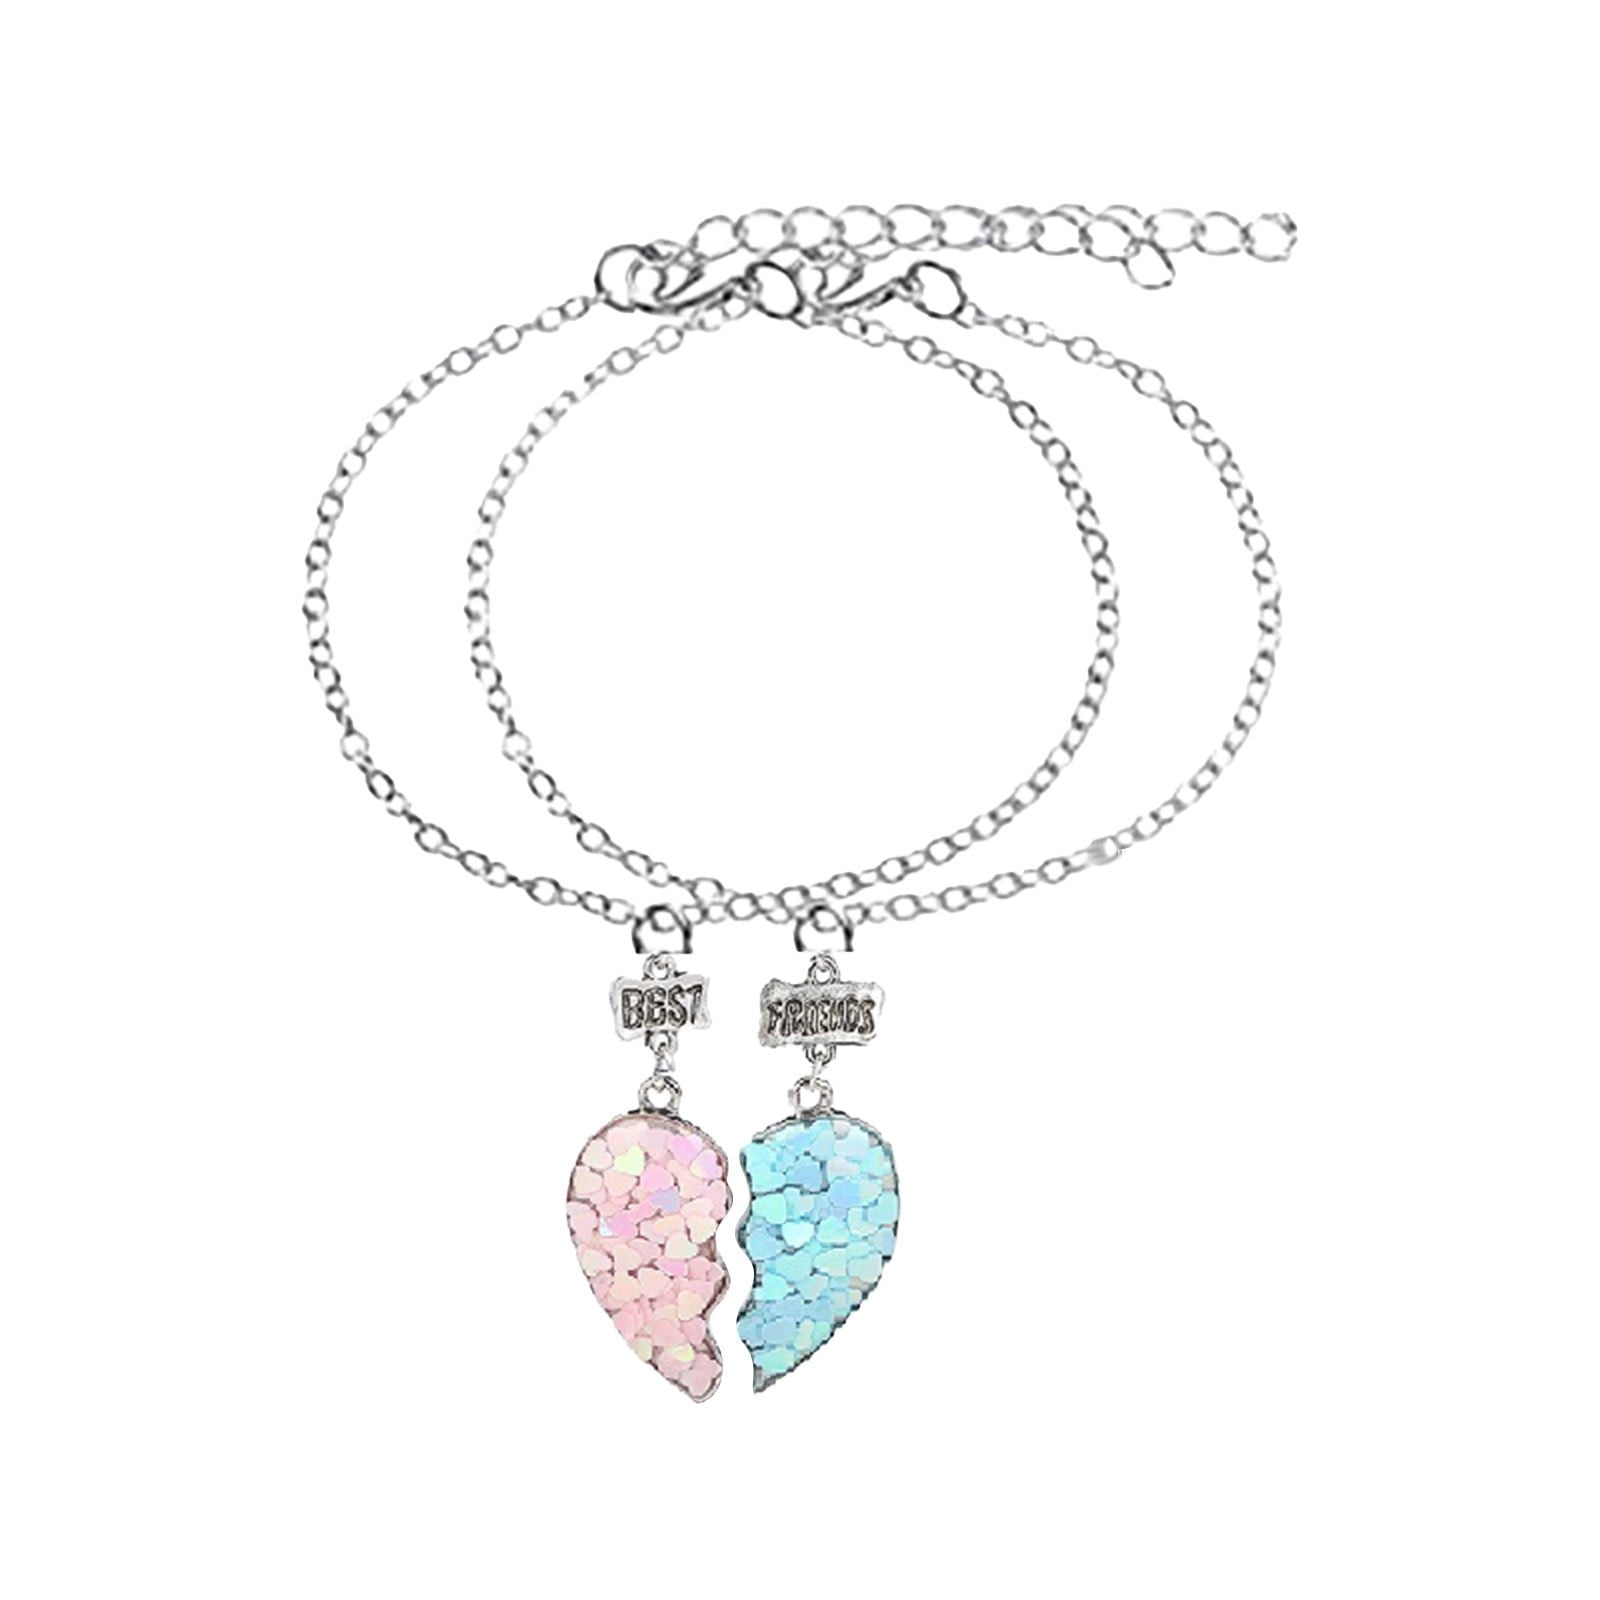 Amazon.com: Friendship Bracelet Set of 2 for Best Friends, Best Friend  Jewelry for 2 Teen Girls Bestie, Long Distance BFF Matching Heart Bangle  for Valentines Day Birthday Christmas: Clothing, Shoes & Jewelry